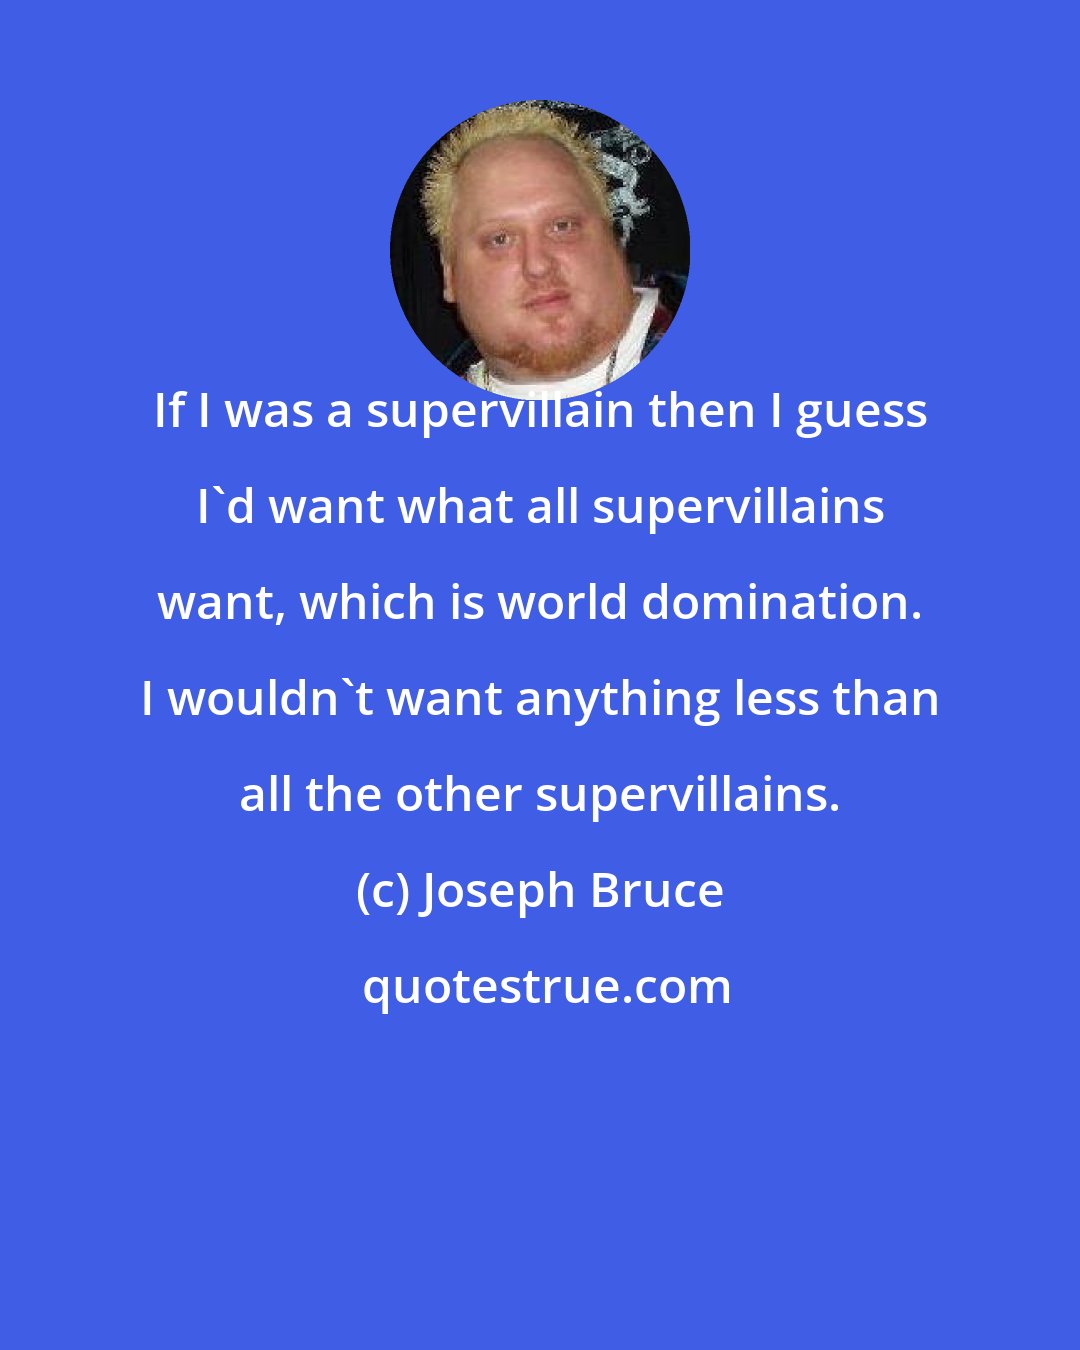 Joseph Bruce: If I was a supervillain then I guess I'd want what all supervillains want, which is world domination. I wouldn't want anything less than all the other supervillains.